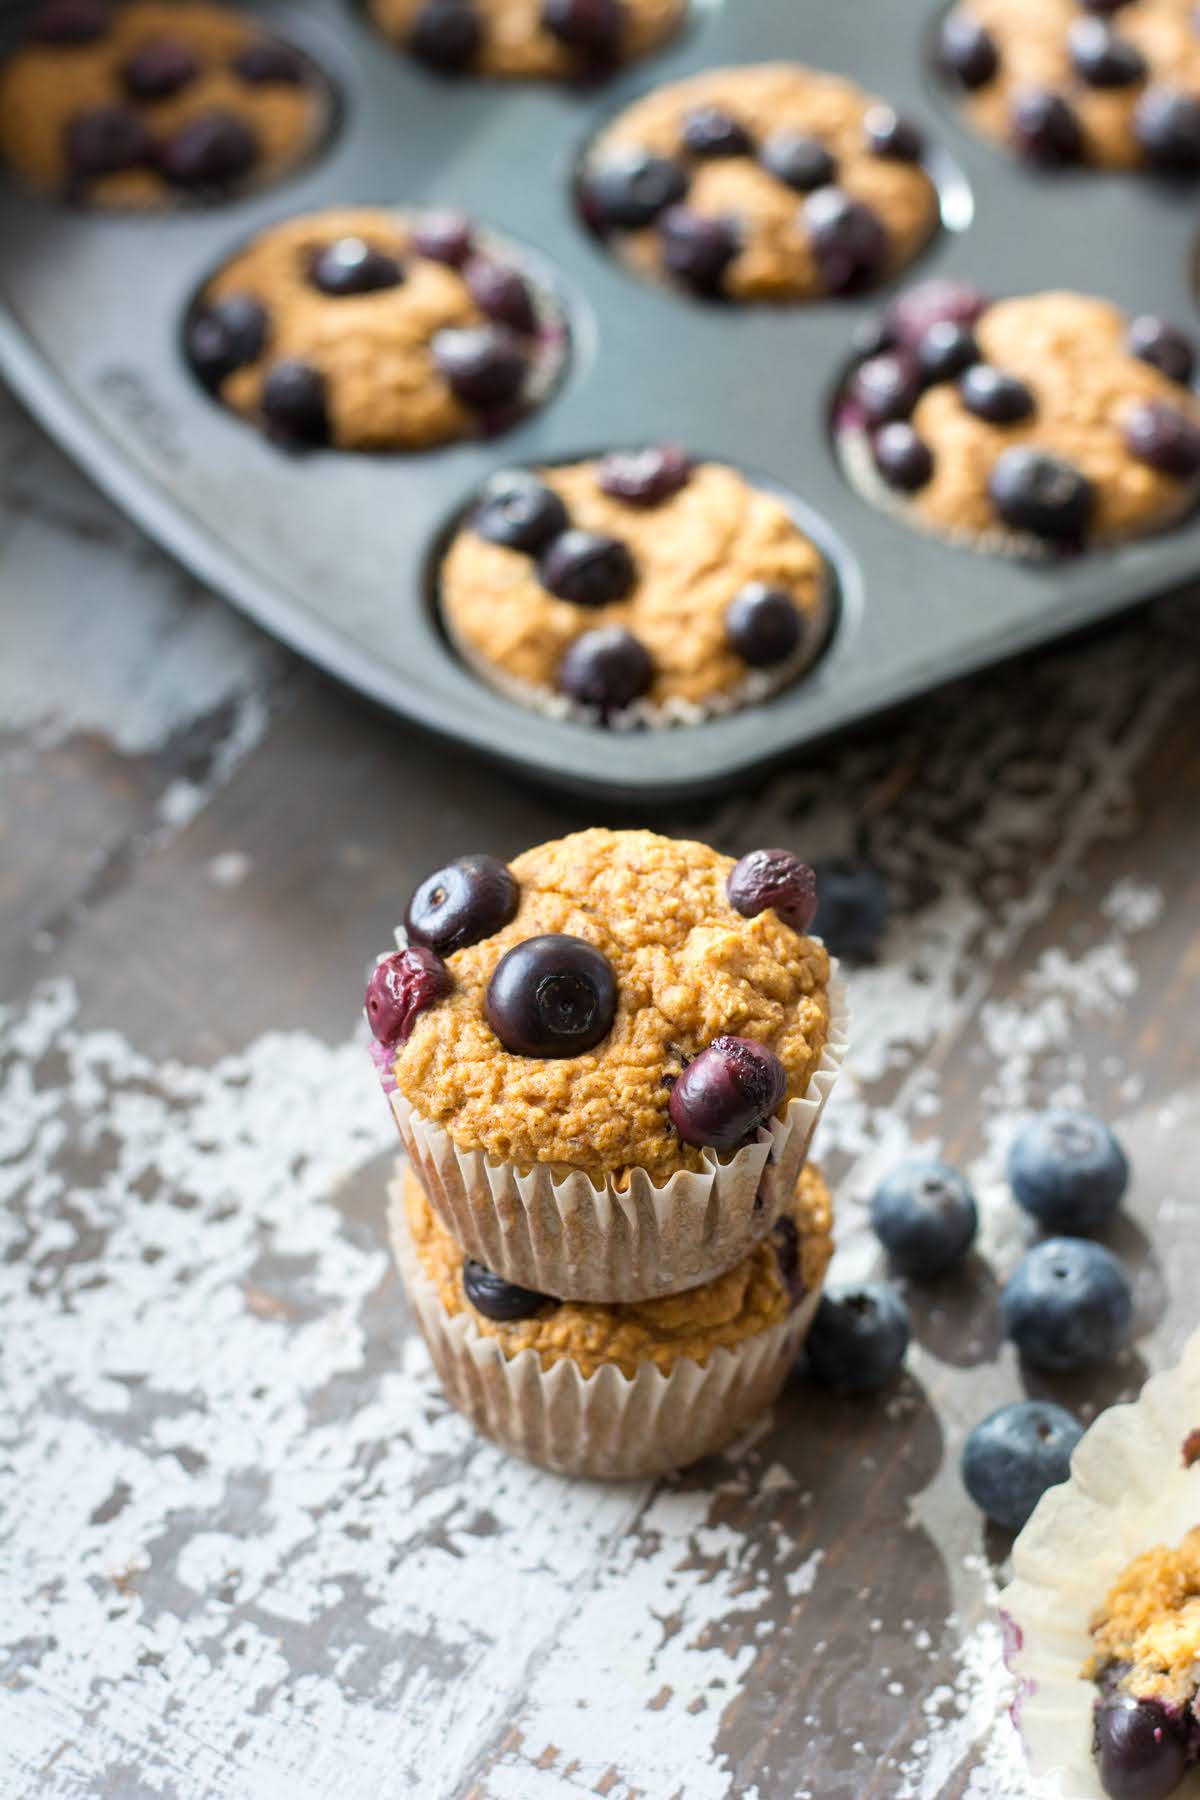 Two blueberry muffins stacked together in front of a muffin tin